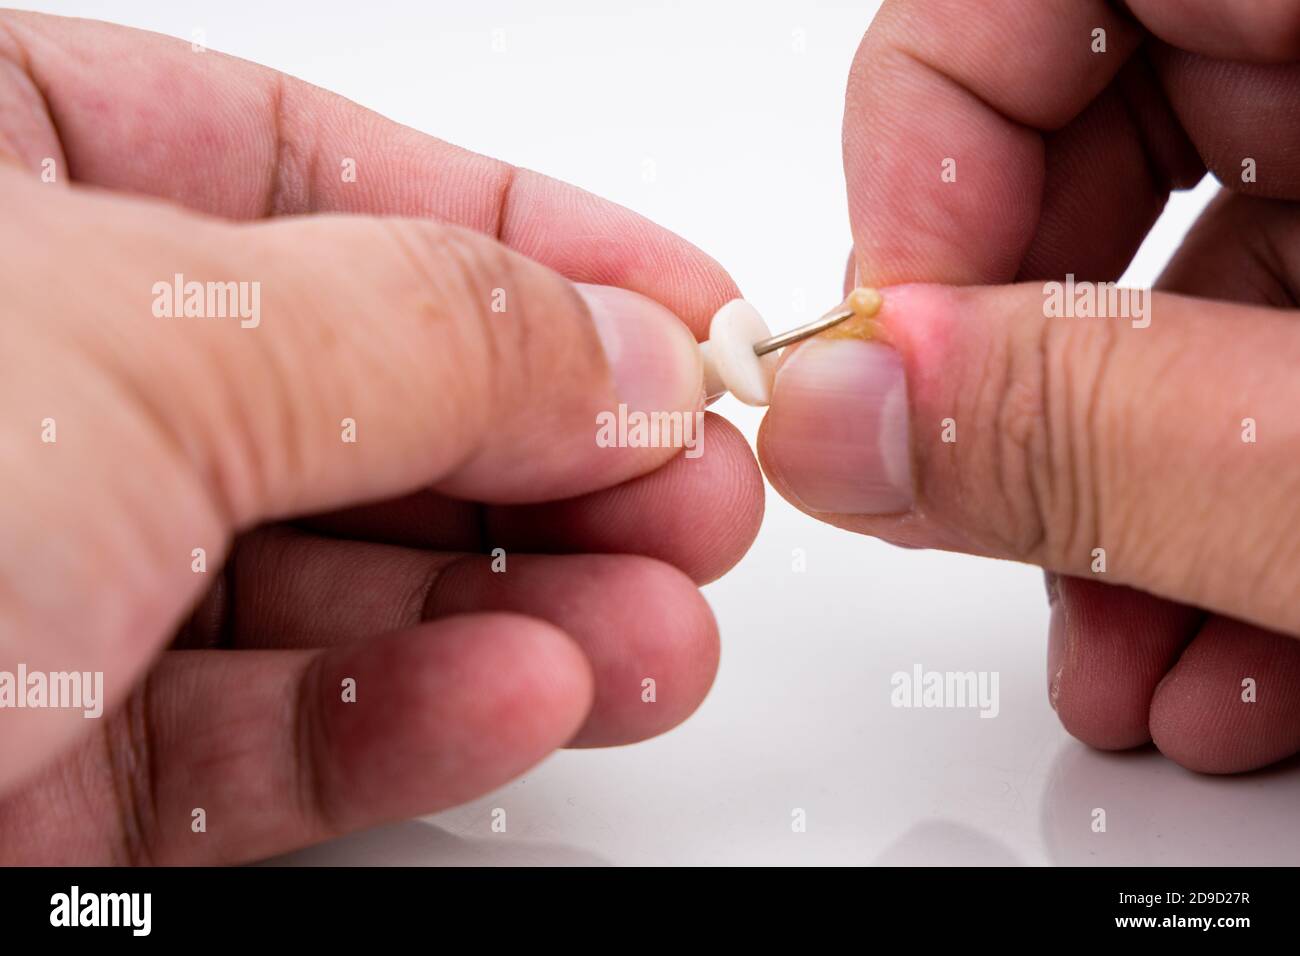 Series of painful finger nail skin infection with pus reatment Stock Photo